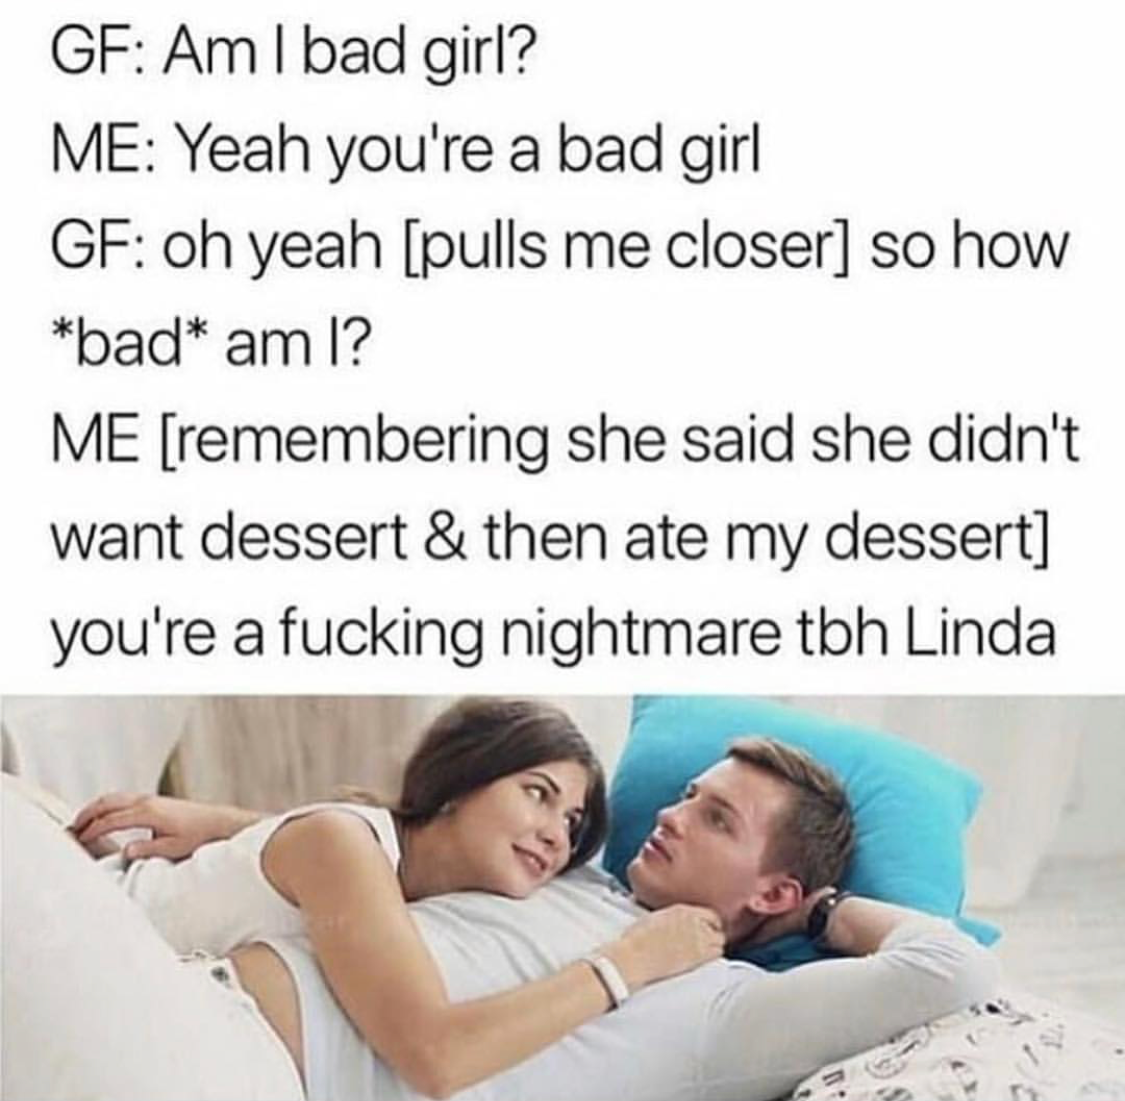 bad girl meme - Gf Am I bad girl? Me Yeah you're a bad girl Gf oh yeah pulls me closer so how bad am I? Me remembering she said she didn't want dessert & then ate my dessert you're a fucking nightmare tbh Linda